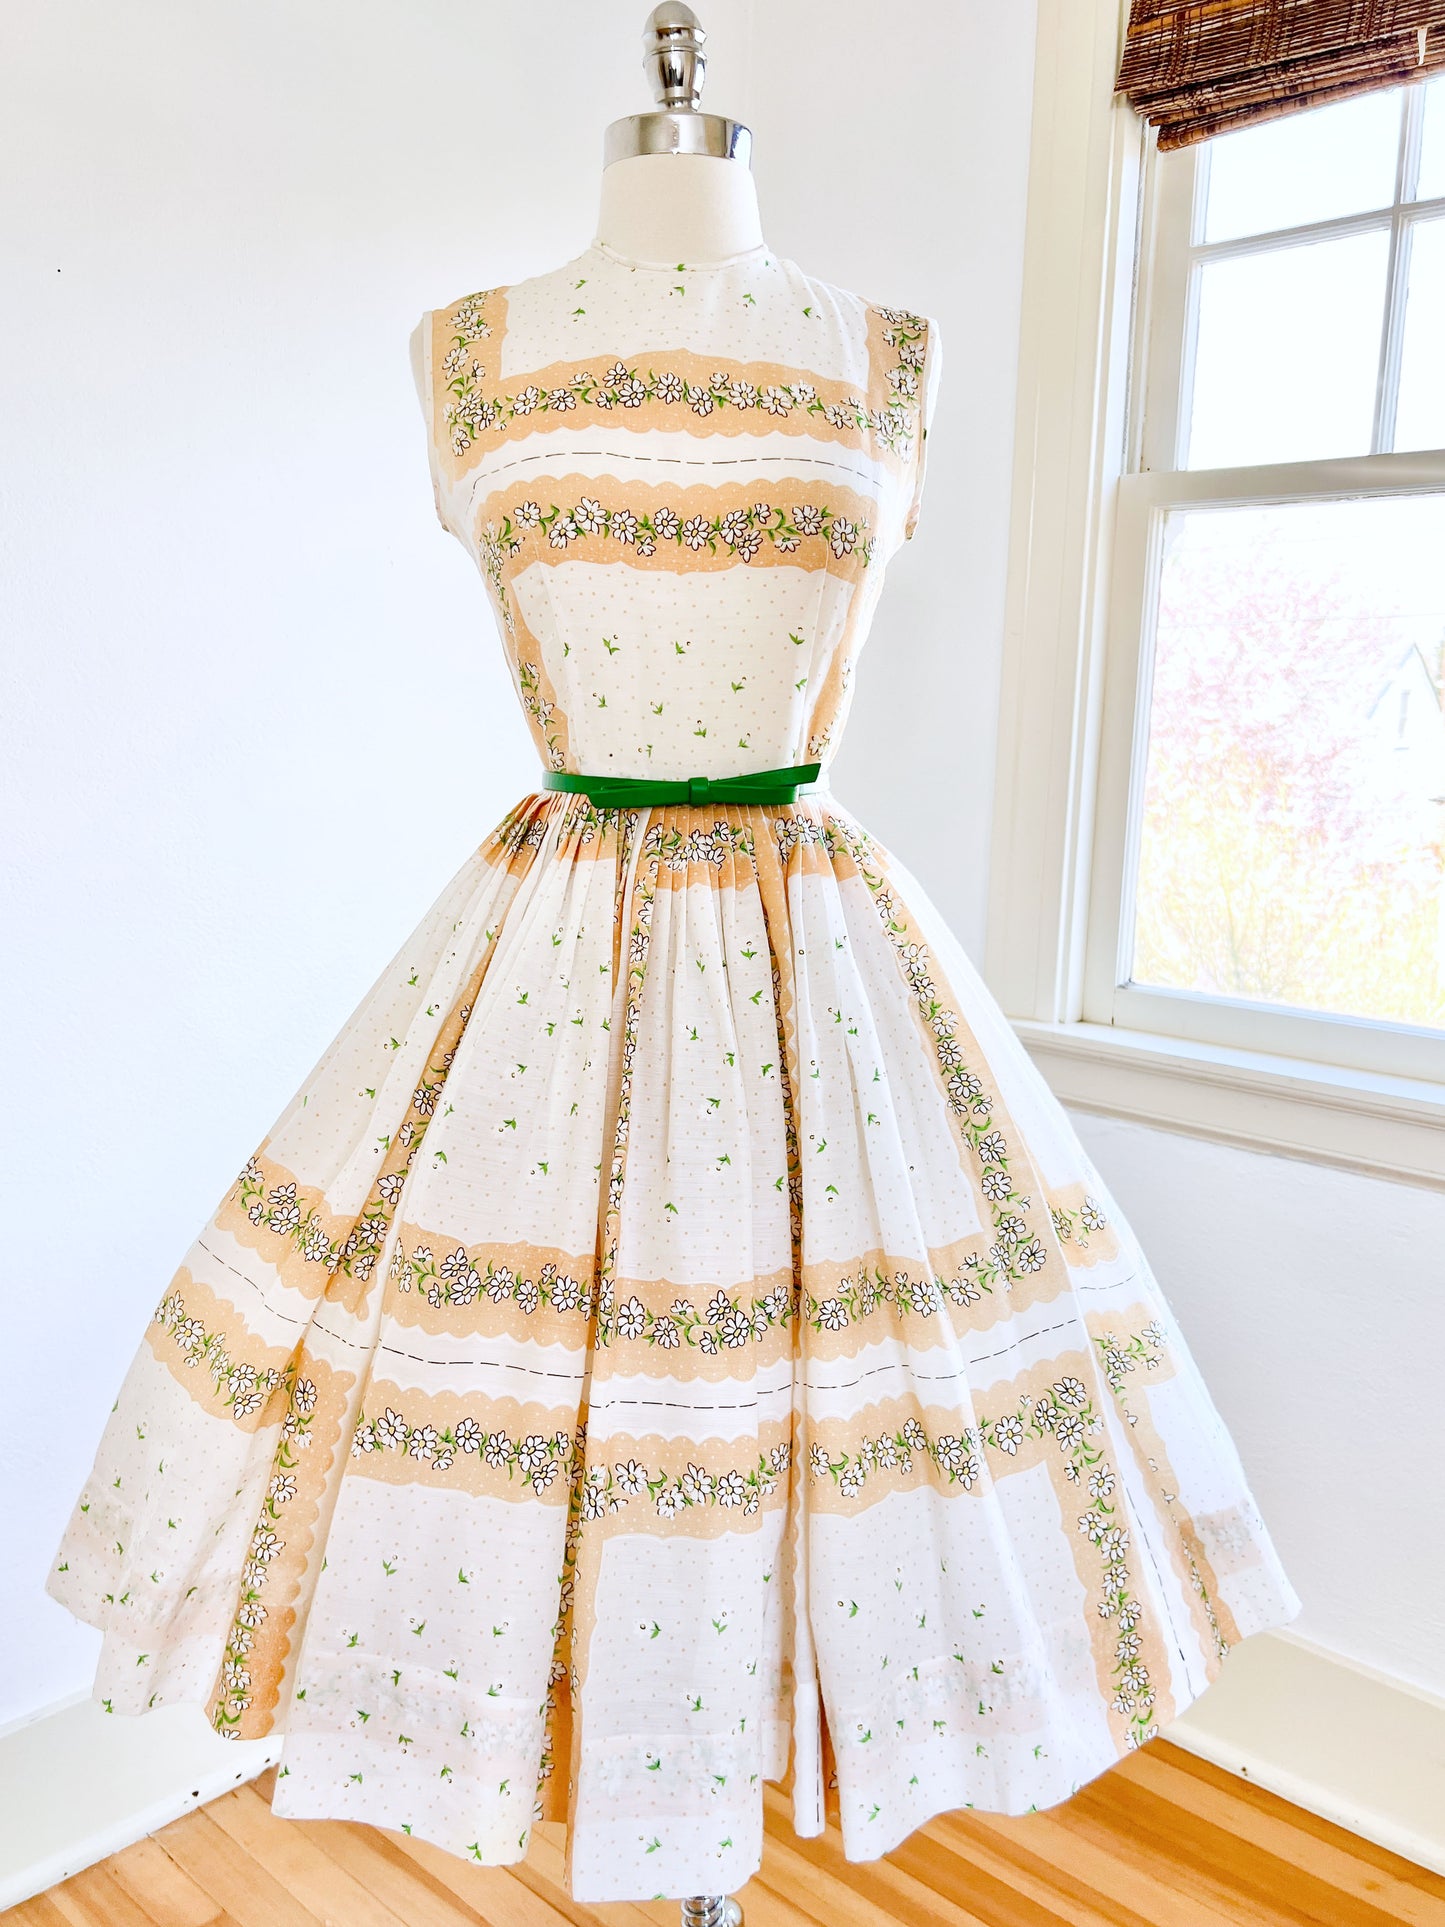 Vintage 1950s Dress - PRETTY Voile Cotton Jerry Gilden Sundress w Fawn, Apple Green, White Daisy Border Print Size XS to S